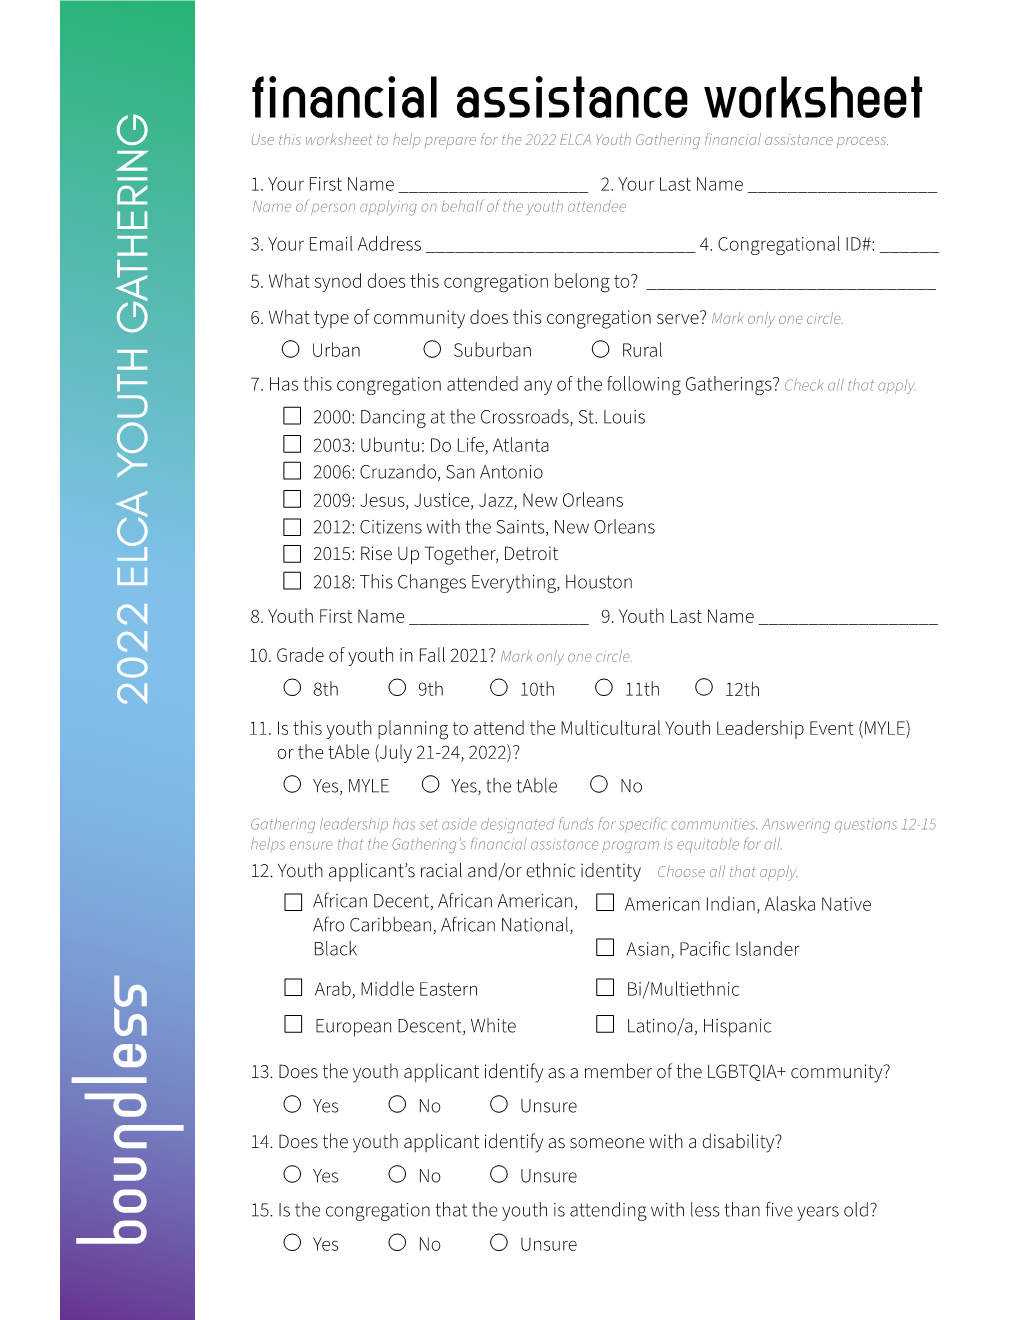 Financial Assistance Worksheet Use This Worksheet to Help Prepare for the 2022 ELCA Youth Gathering Financial Assistance Process